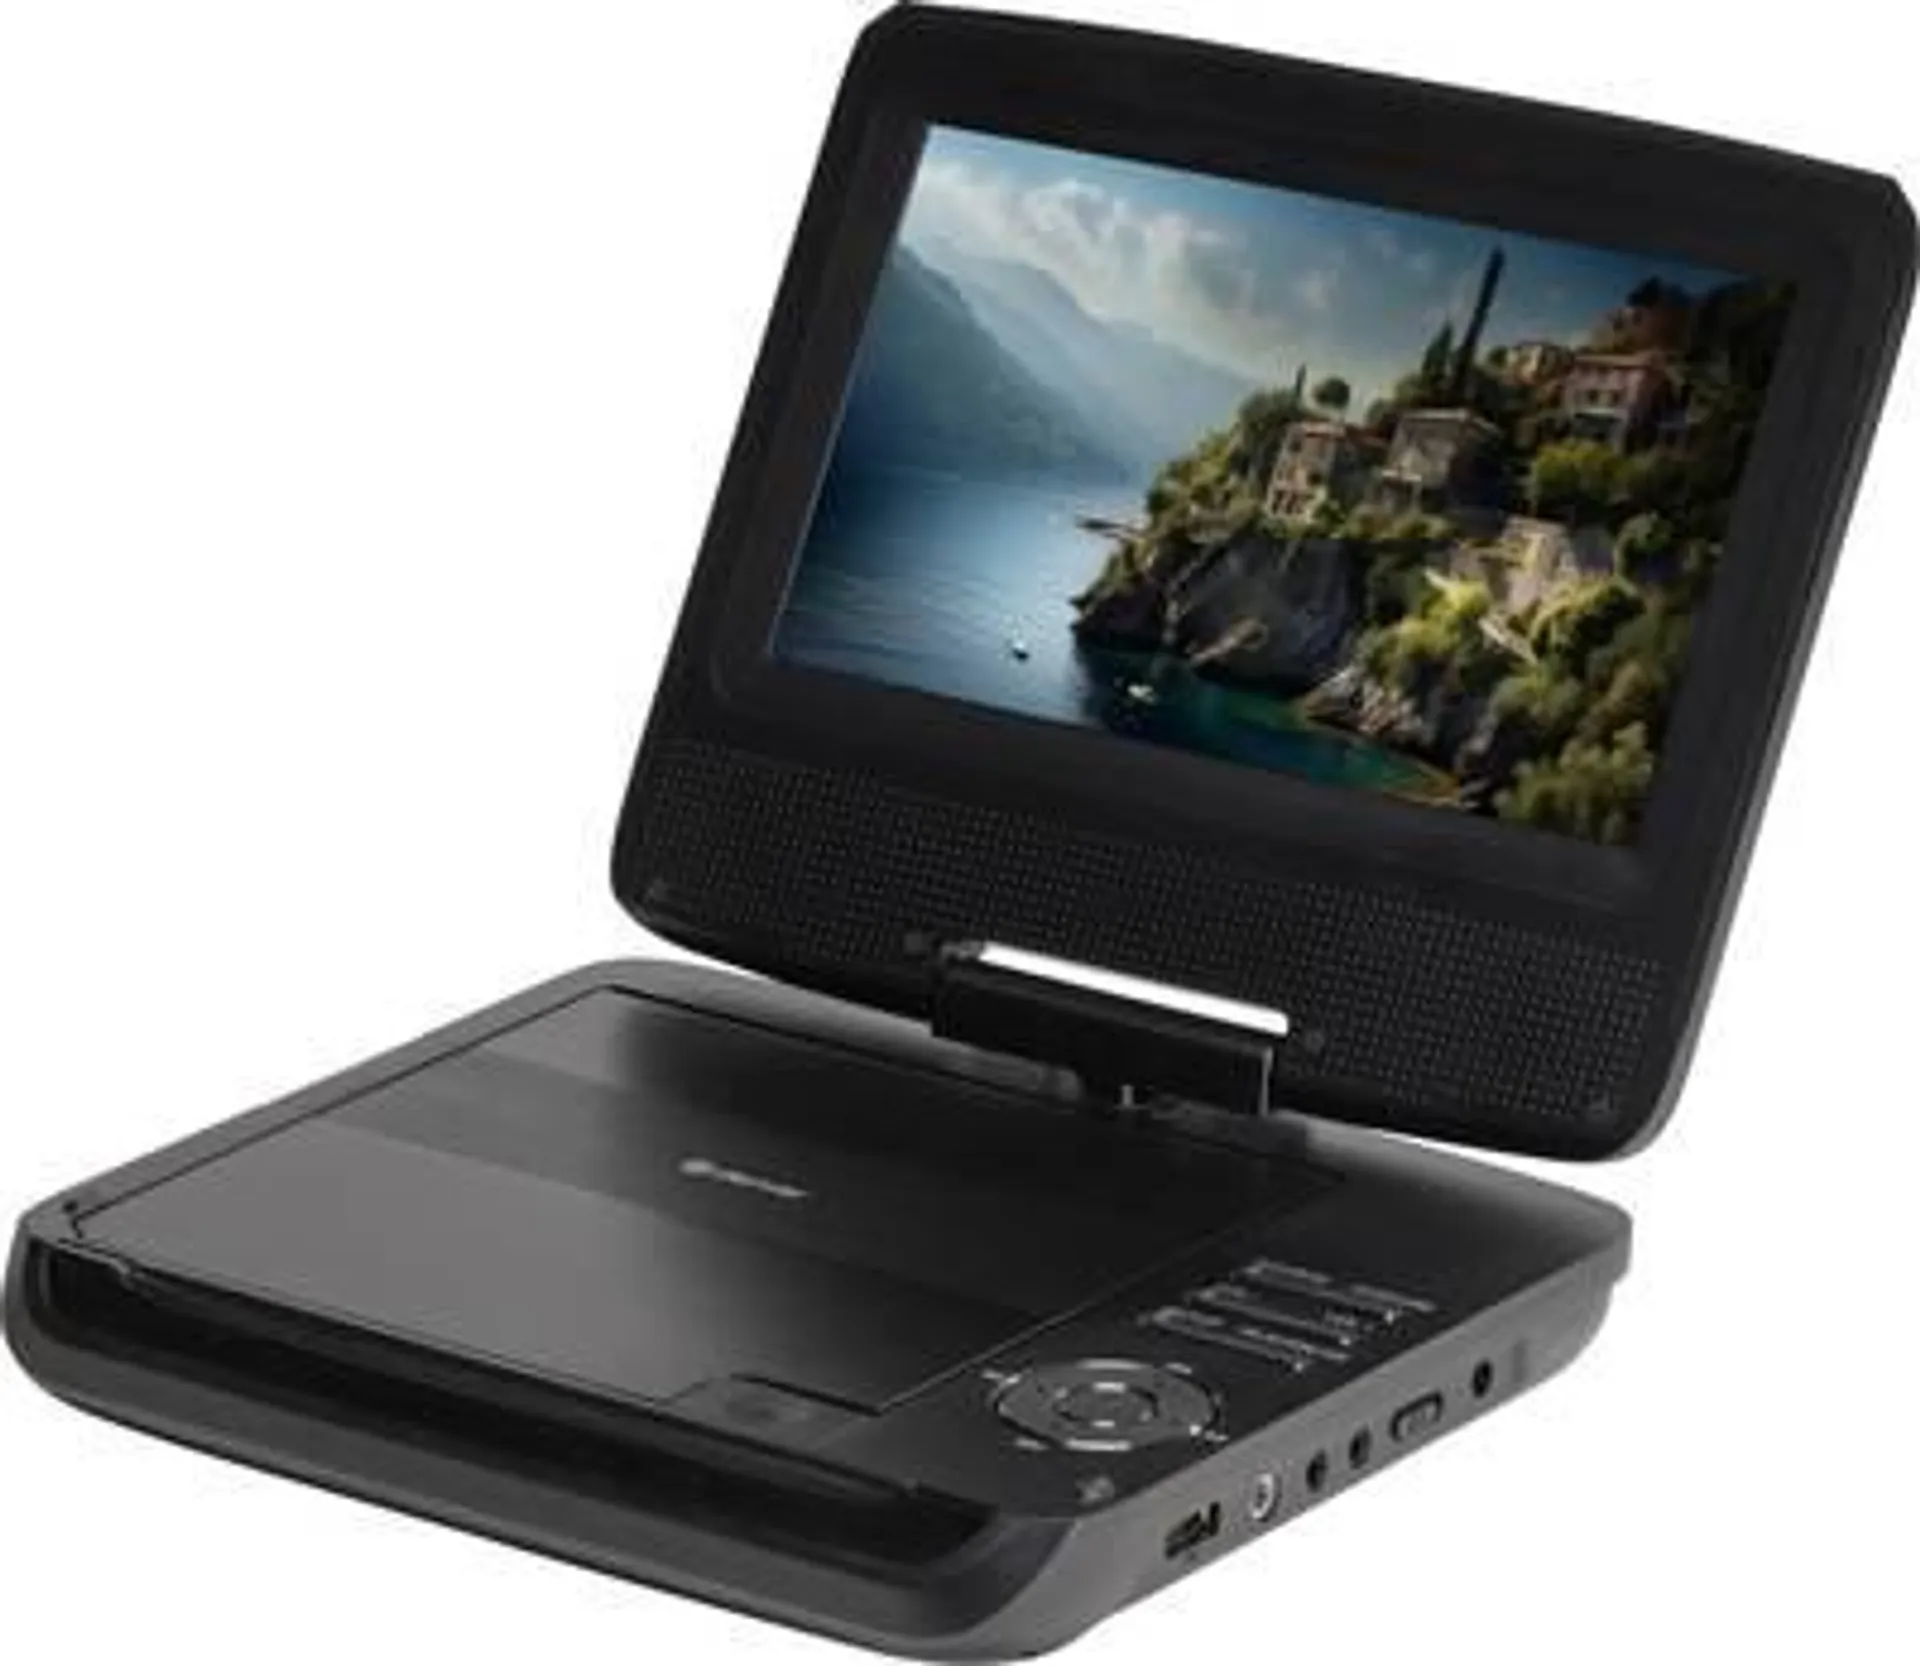 Denver MT-792 Portable DVD player 17.78 cm 7 inch EEC: B (A - G) Battery-powered, incl. 12V car power cable Black